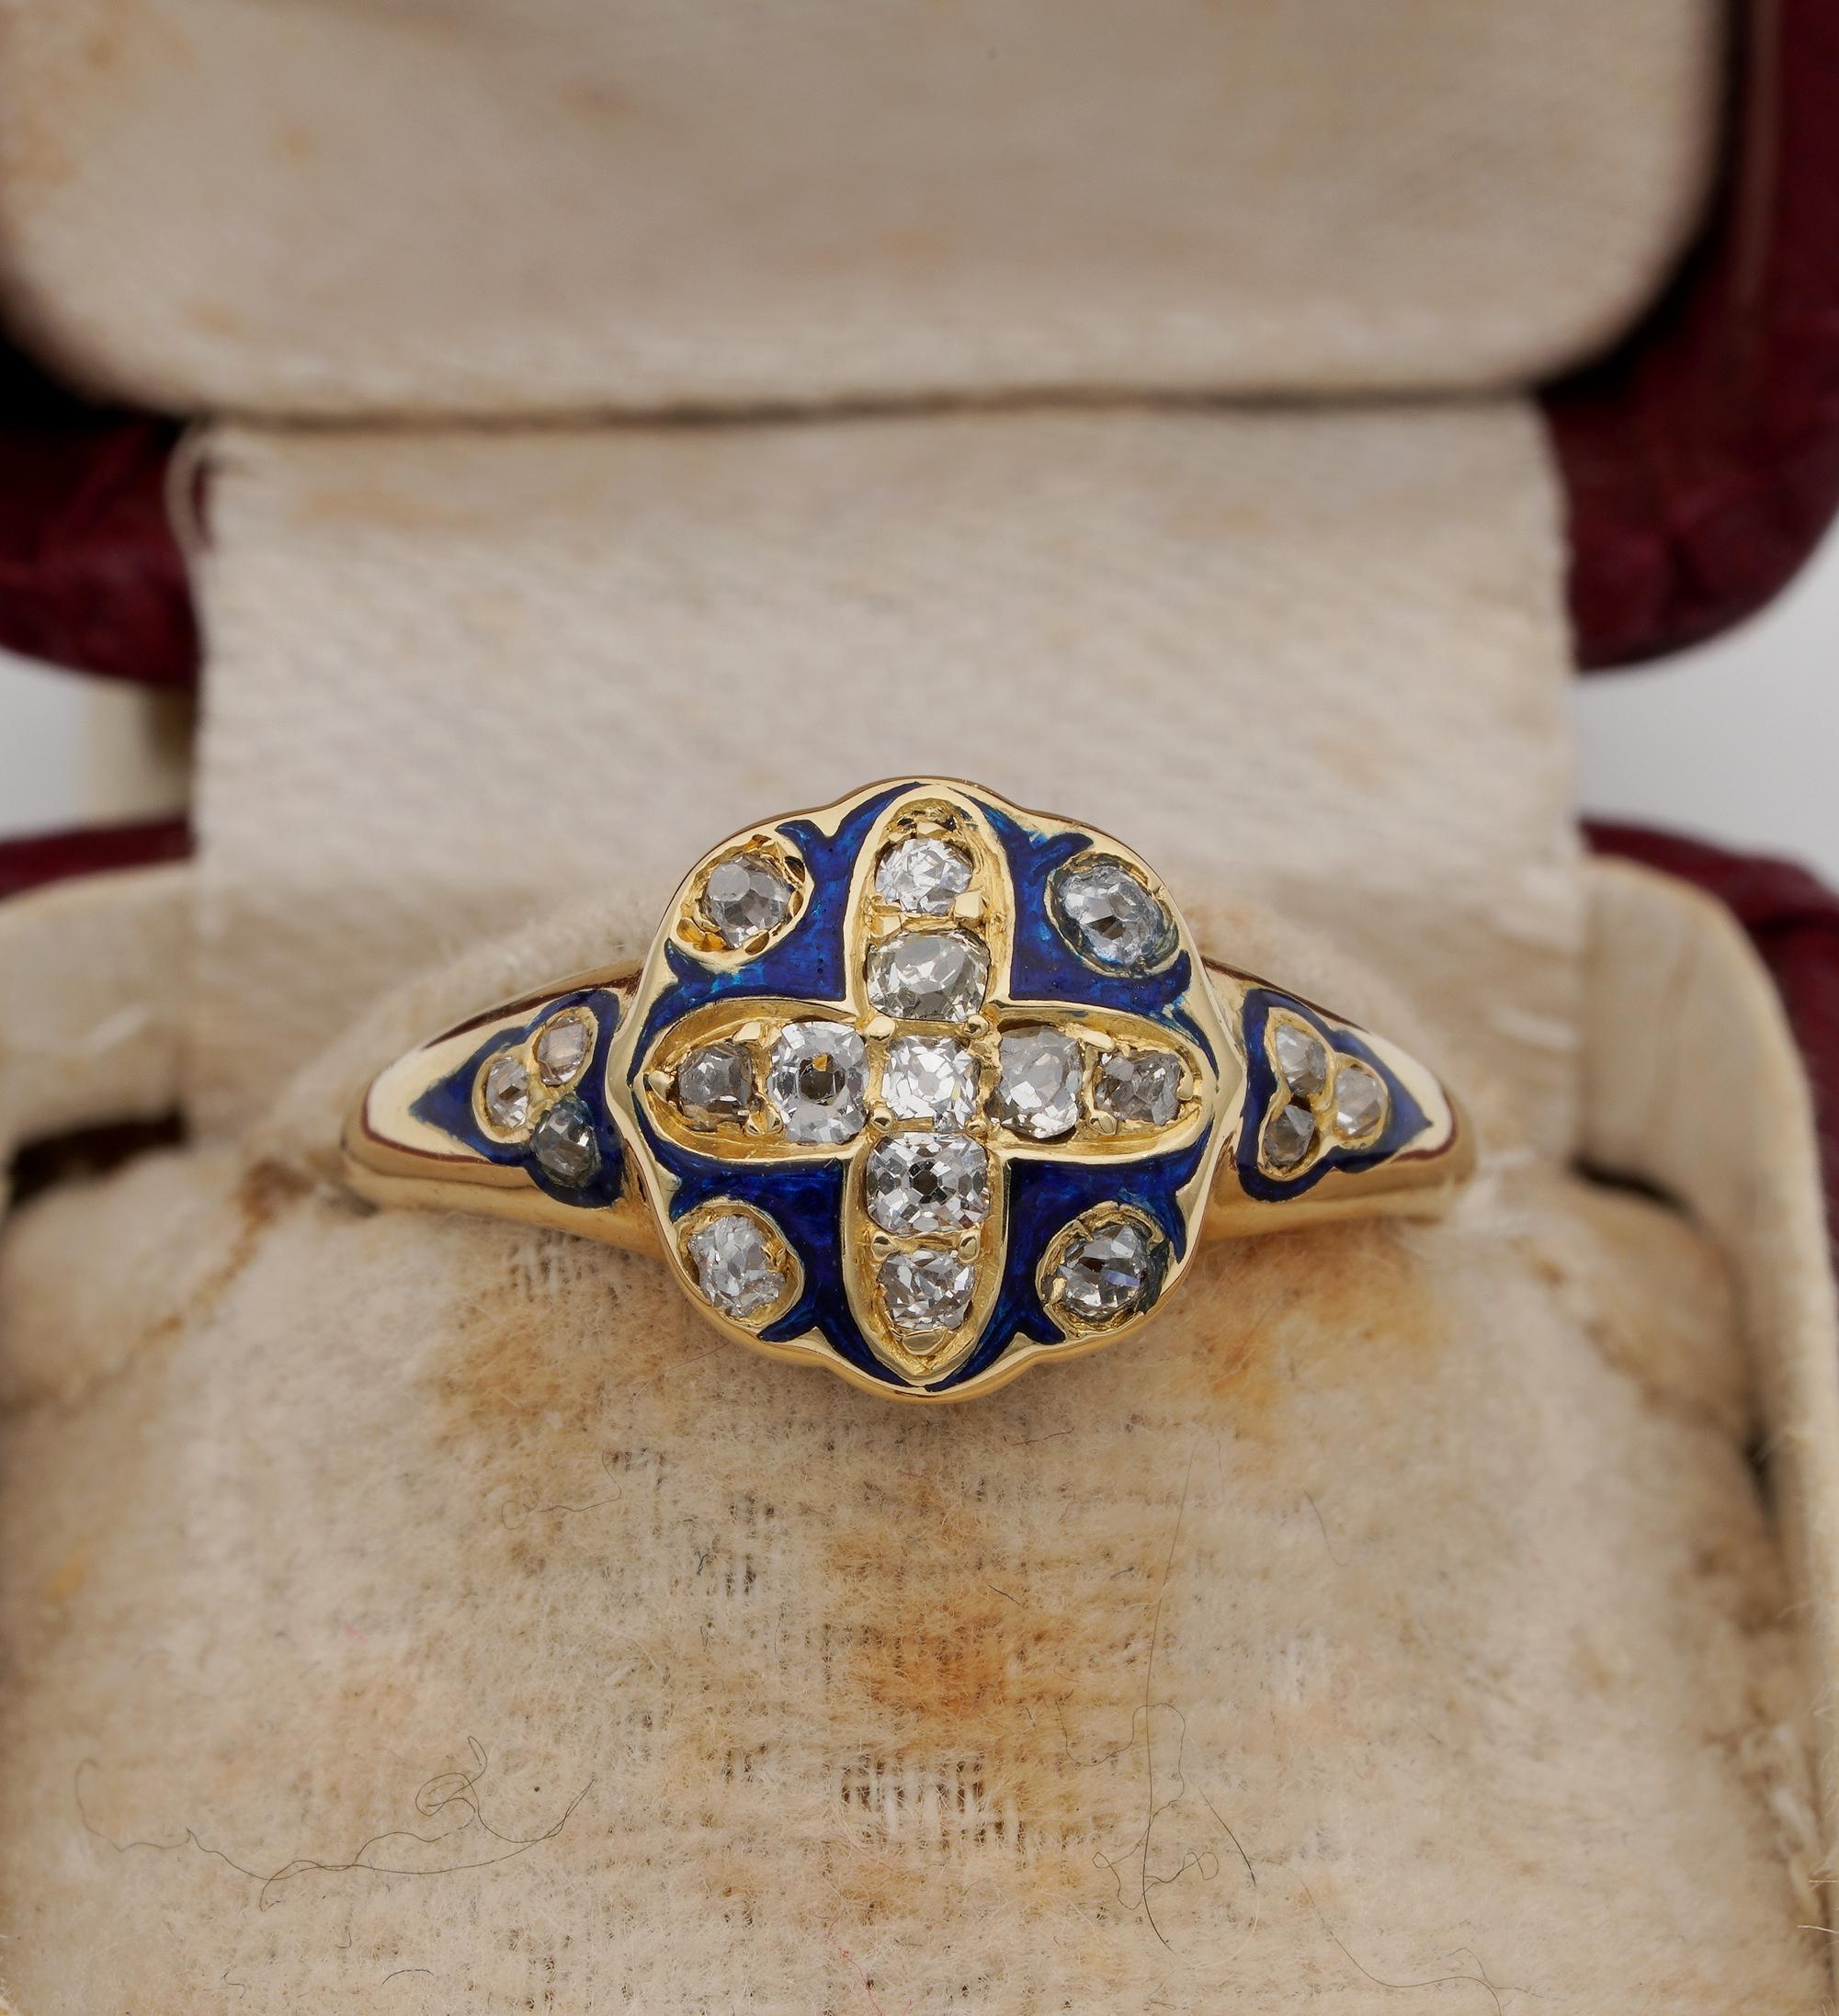 Victorian Memories
Beautiful Victorian period cruciform decorated with Royal Blue enamelling and Diamonds
Hand crafted of solid 18 KT gold – 1890 ca
Set with cushion shaped old mine cut Diamonds for approx .60 Ct. G/H VVS/SI
Low profile, lovely